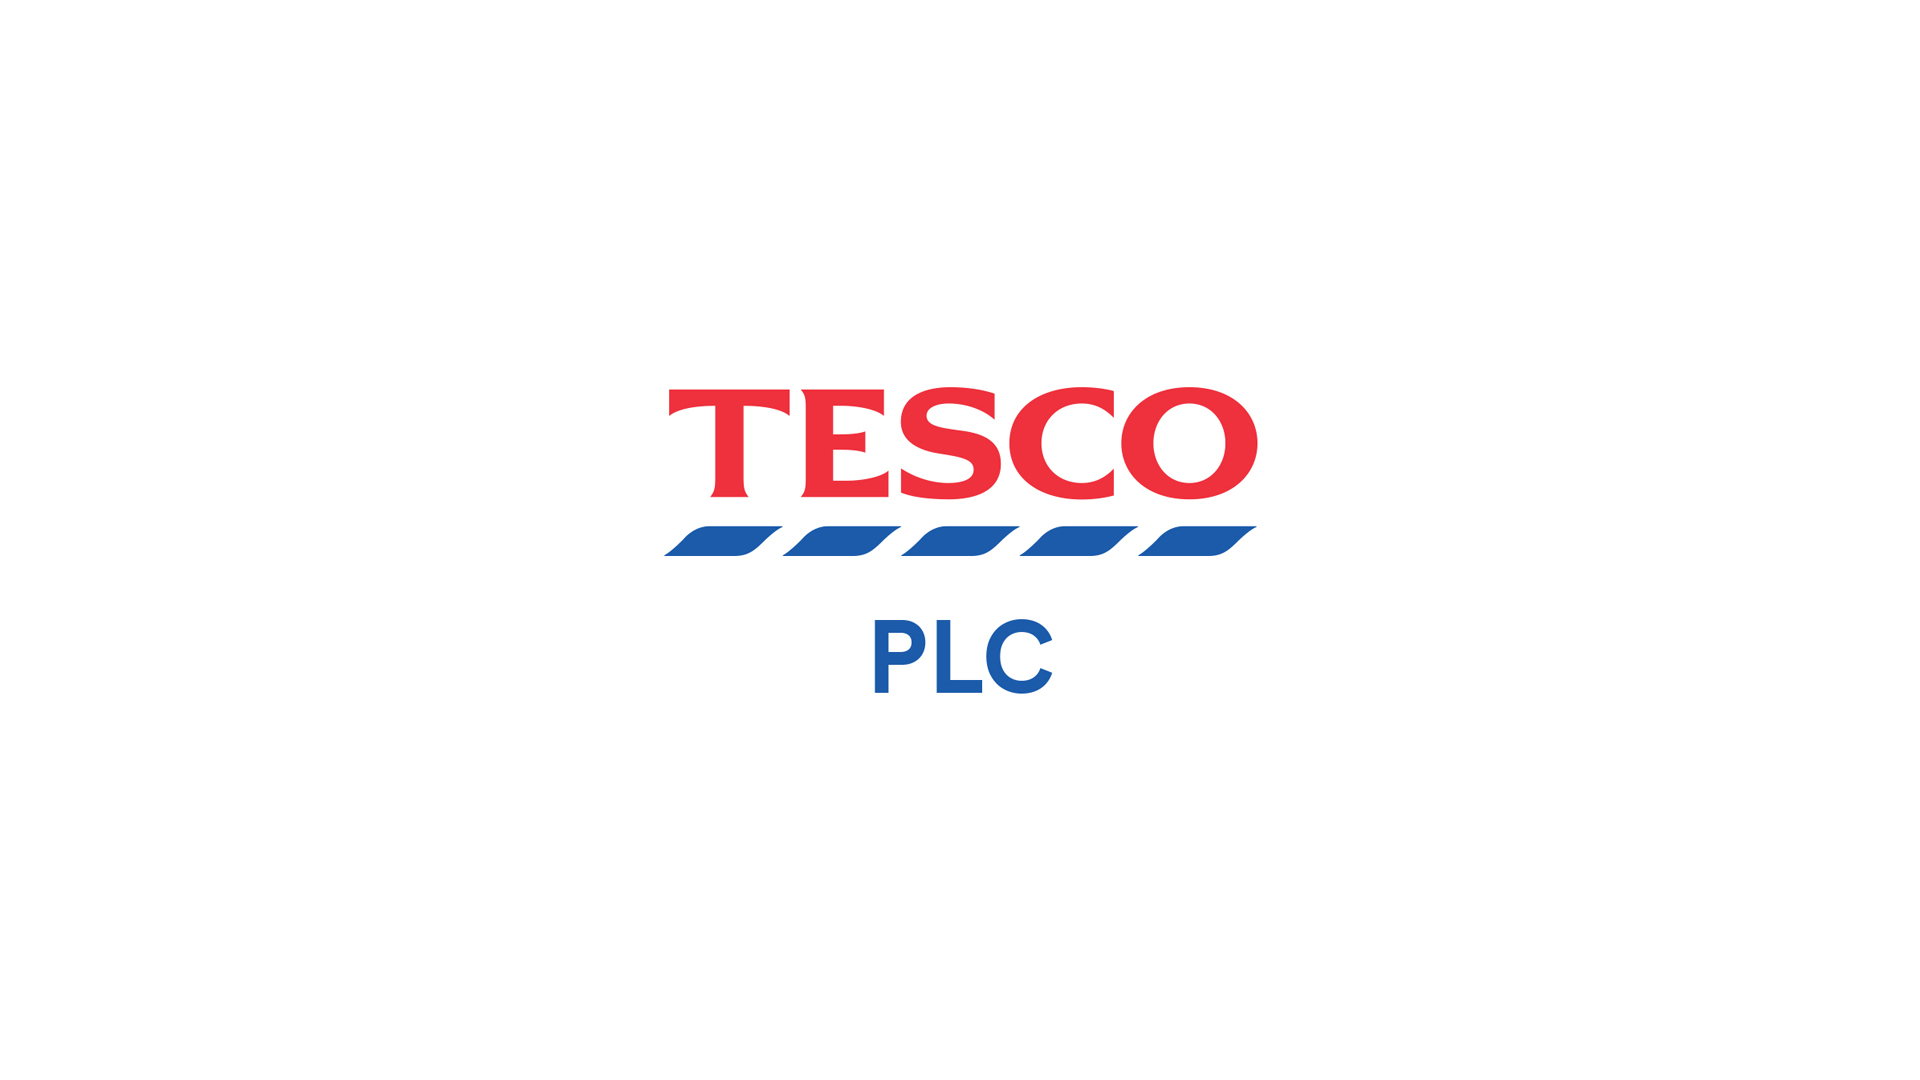 Tesco To Simplify Store Operations With Focus On Metro Plc